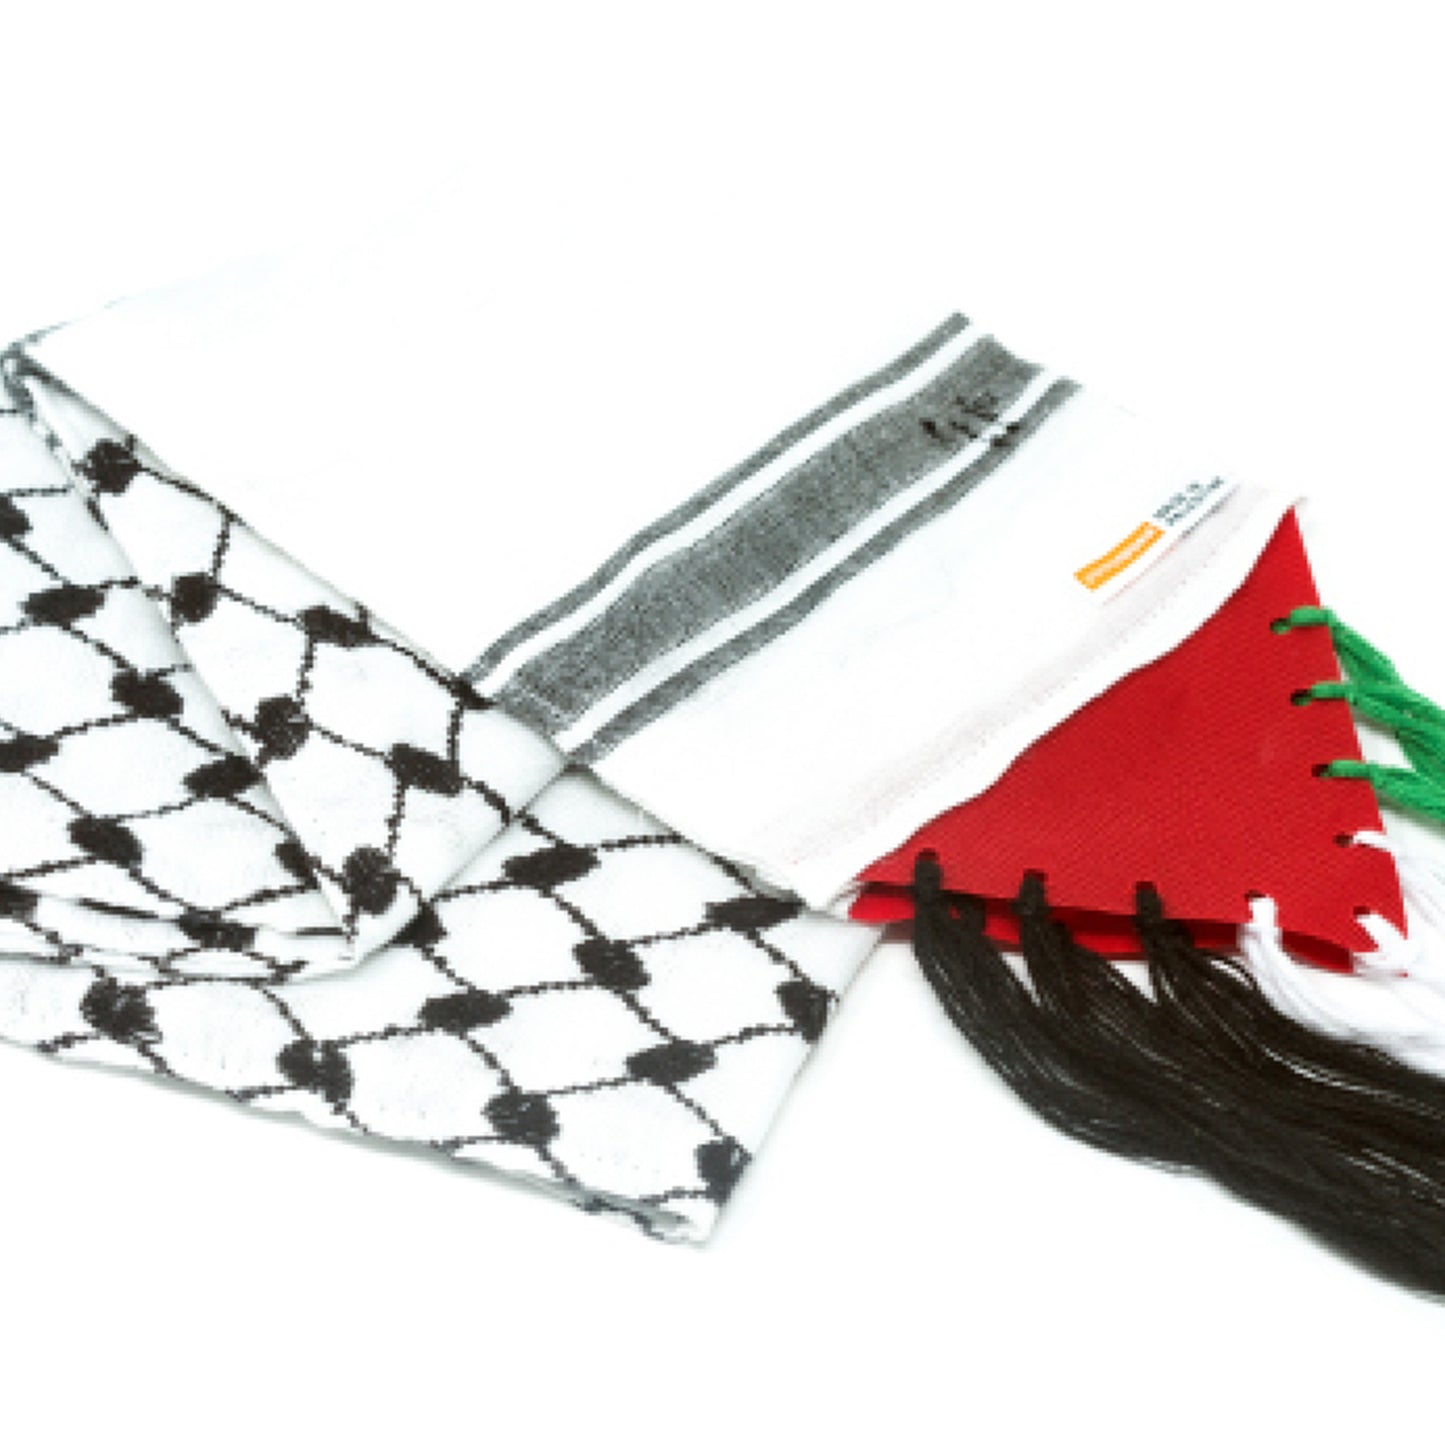 A Gift Box from Palestine